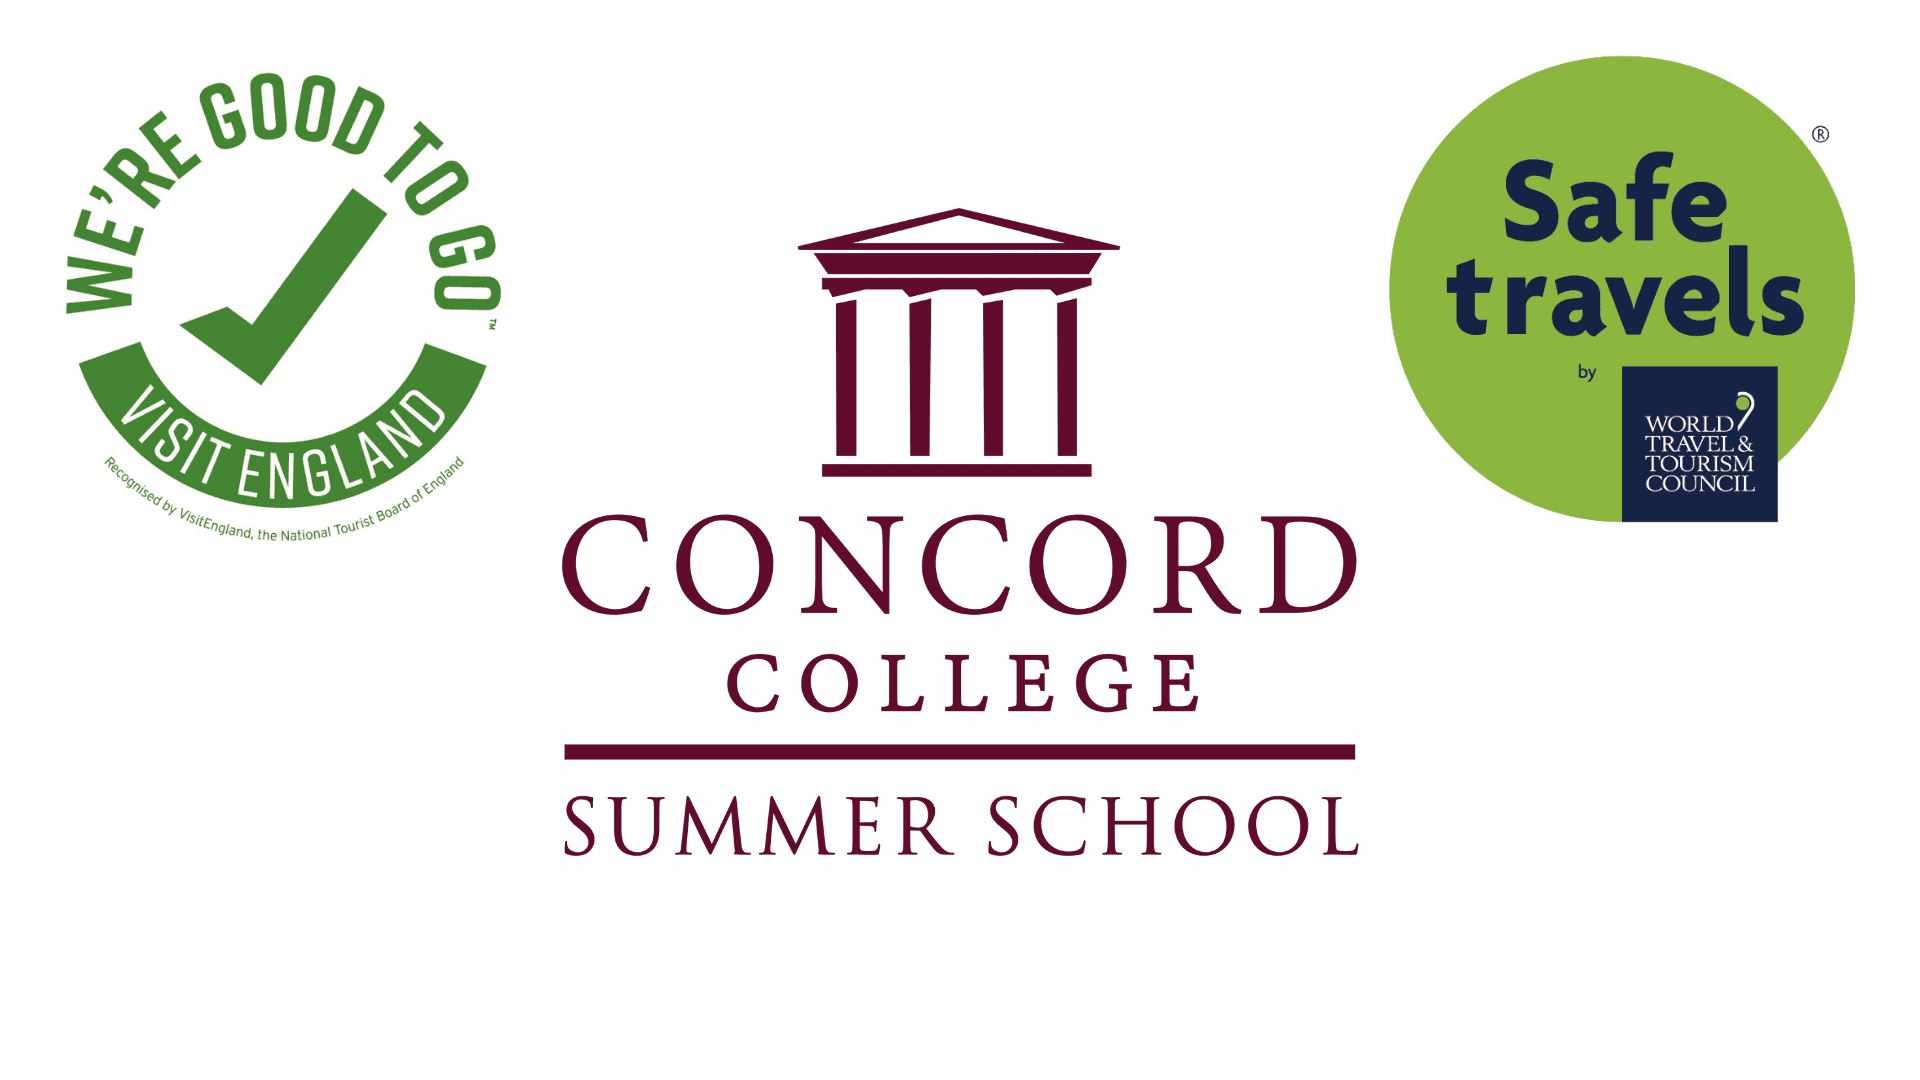 Concord Summer is “Good to Go”